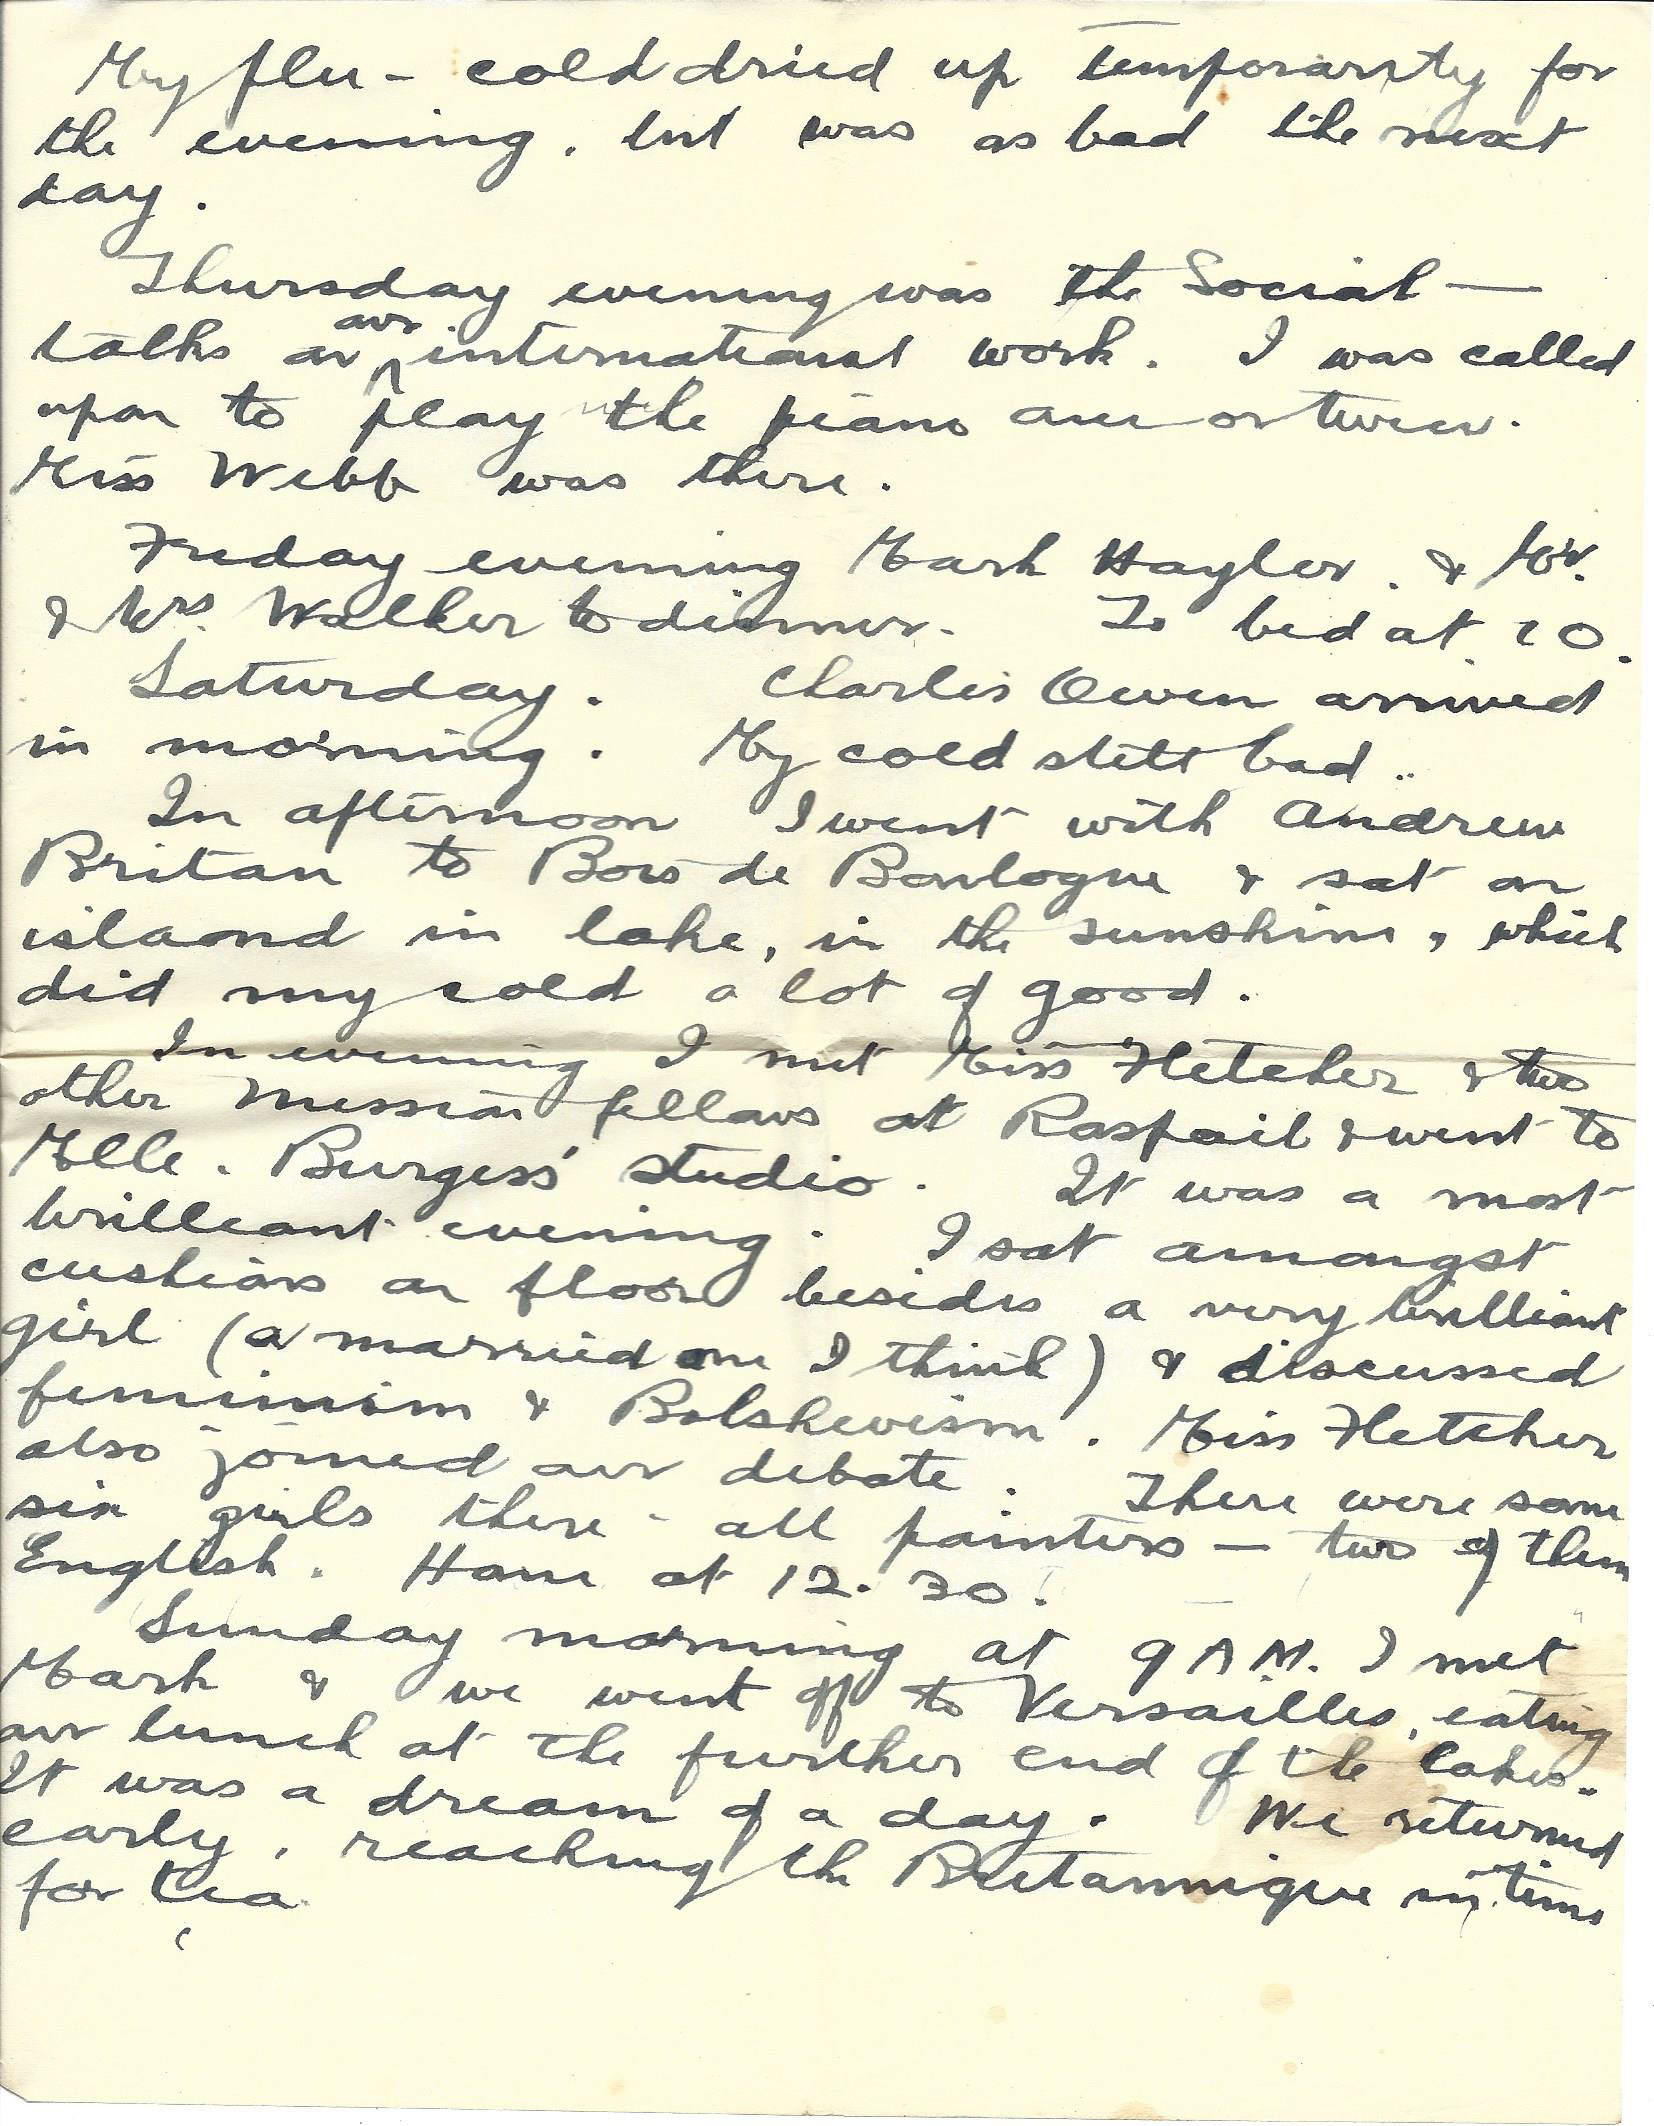 1920-02-28 p3 Donald Bearman letter to his father